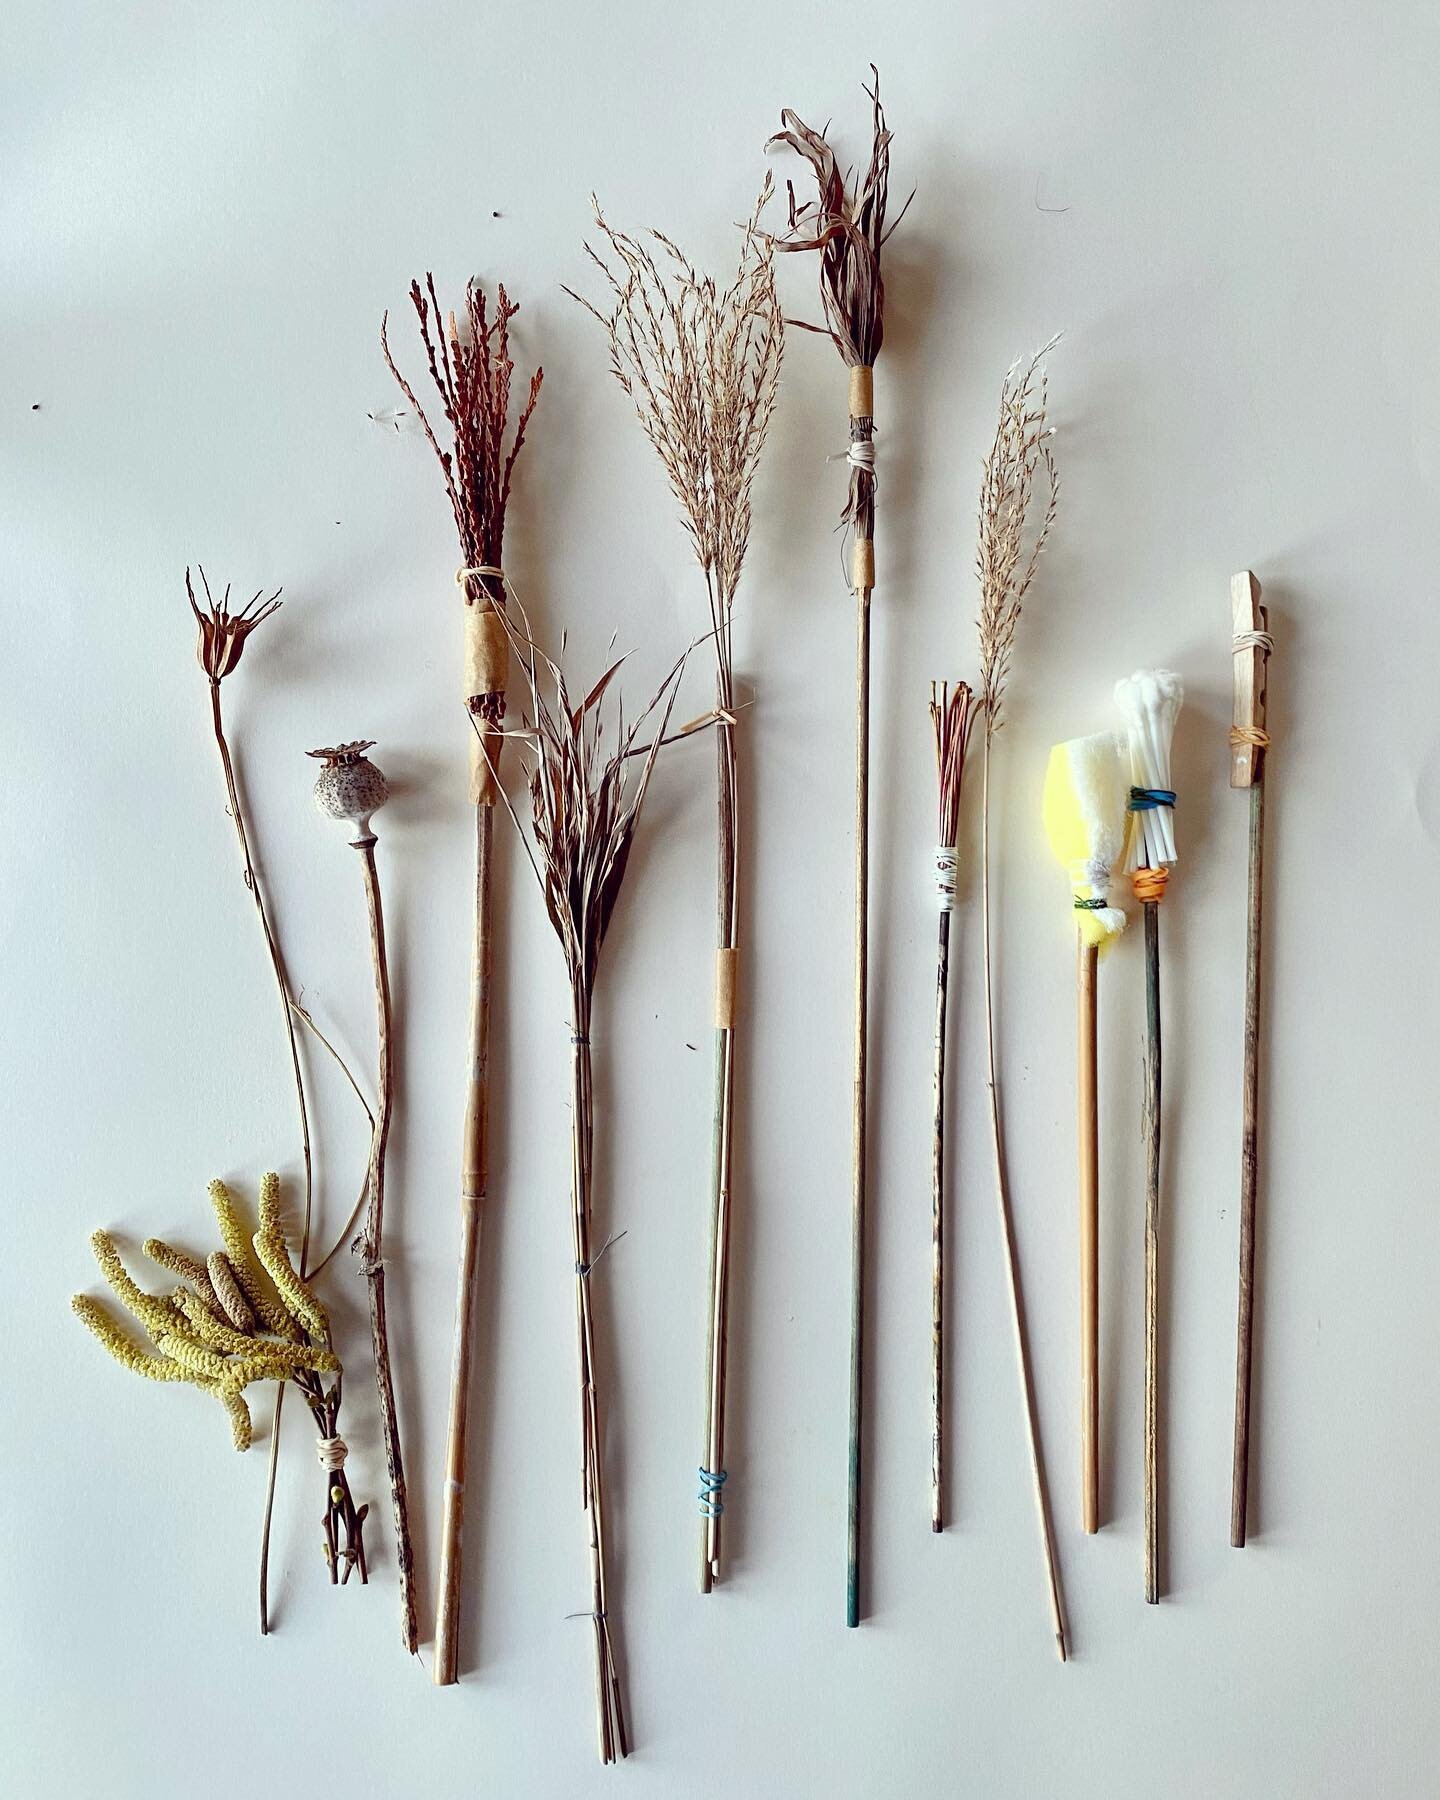 Foraging in the winter garden for grasses, leaf stems, catkins, feathers &hellip;making some DIY brushes for my classes on Ink &amp; Watercolour starting again tonight @royaldrawingschool #newterm #springterm #homemade #diy #experimentalinkpainting